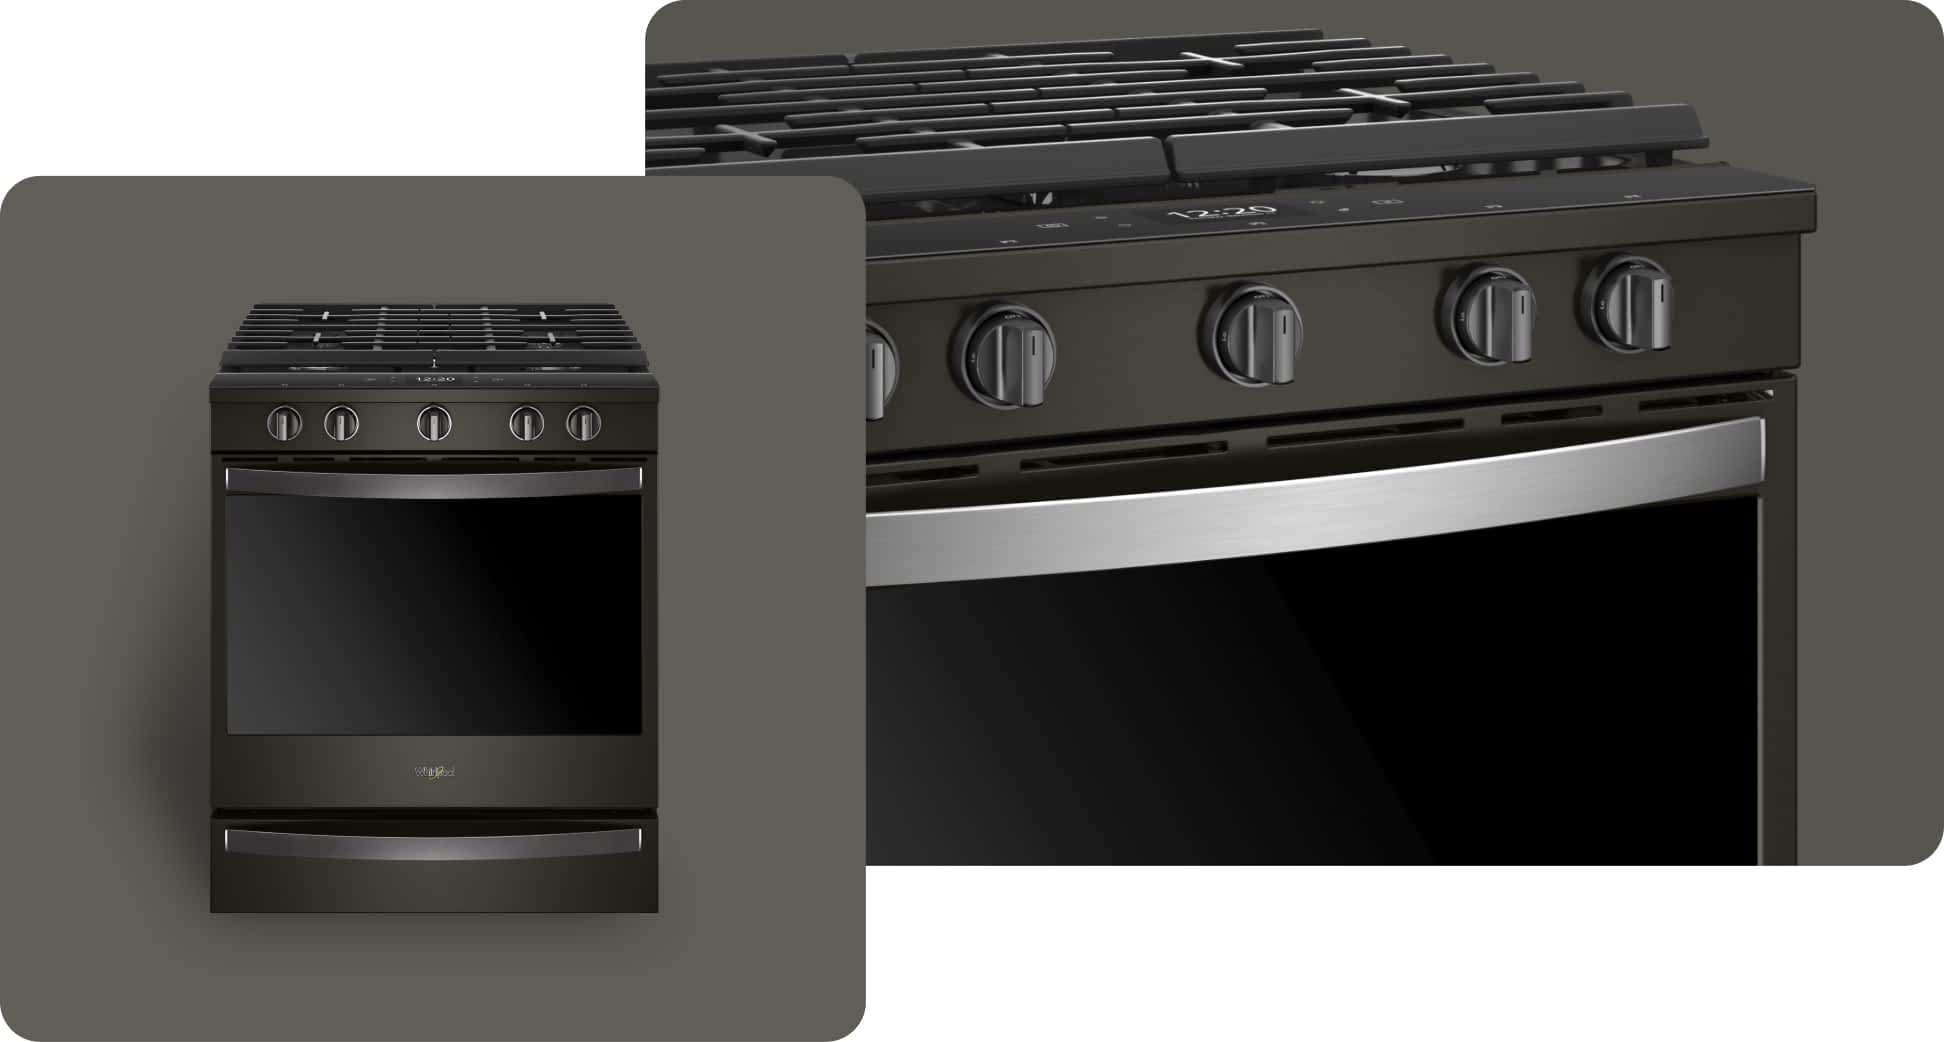 A Whirlpool® Range with a Fingerprint-Resistant Black Stainless Finish